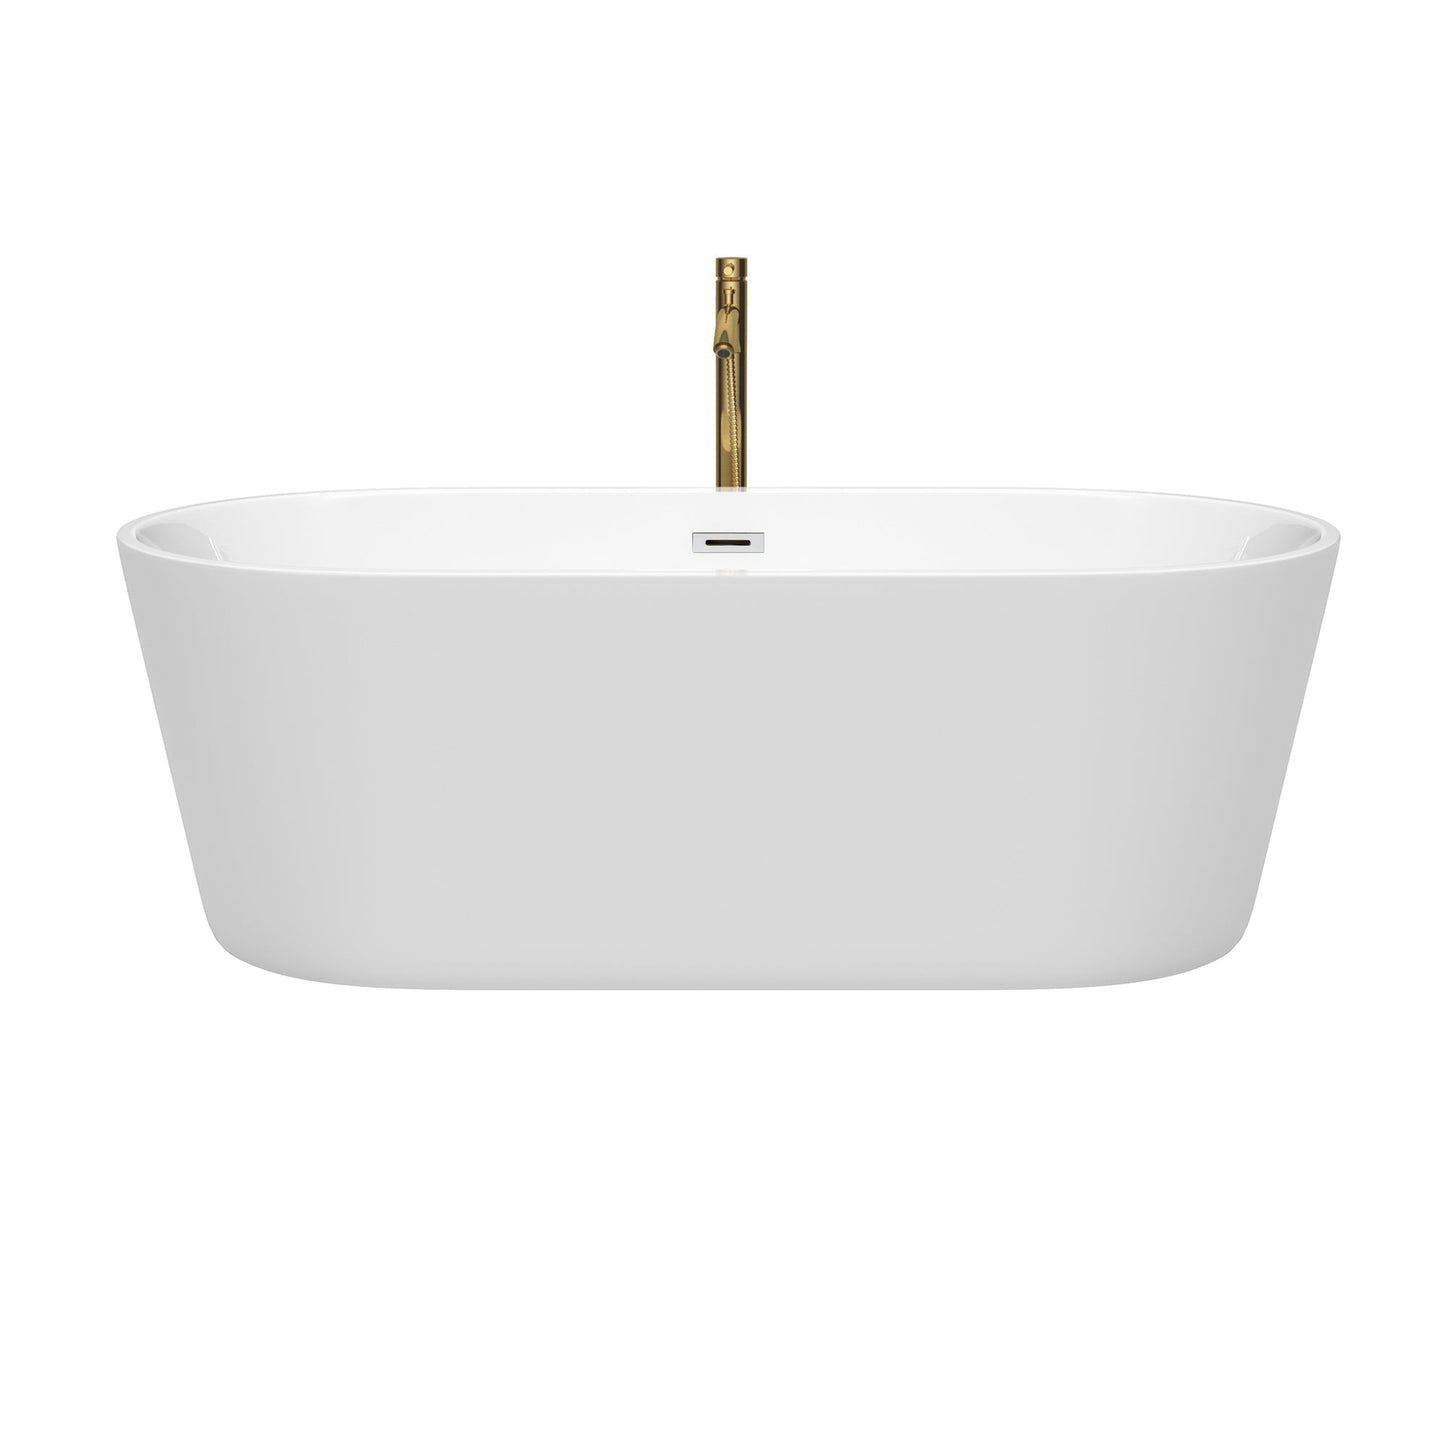 Wyndham Collection Carissa 67" Freestanding Bathtub in White With Polished Chrome Trim and Floor Mounted Faucet in Brushed Gold